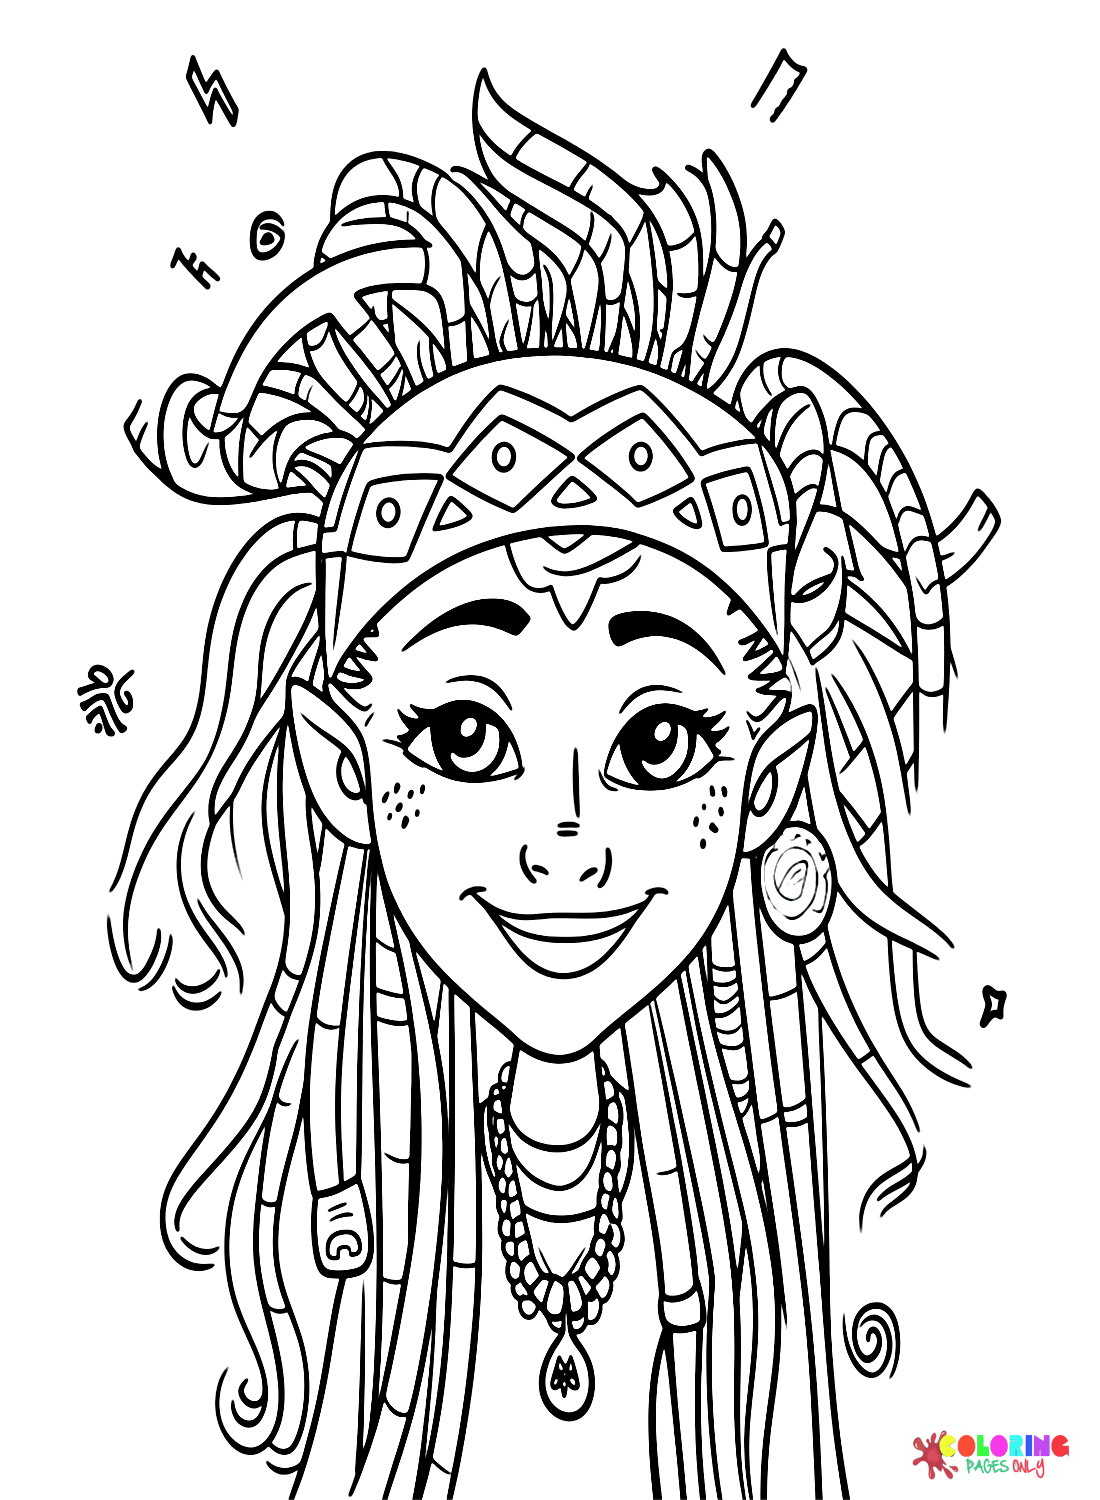 Girl With Dreadlock Hair Coloring Page